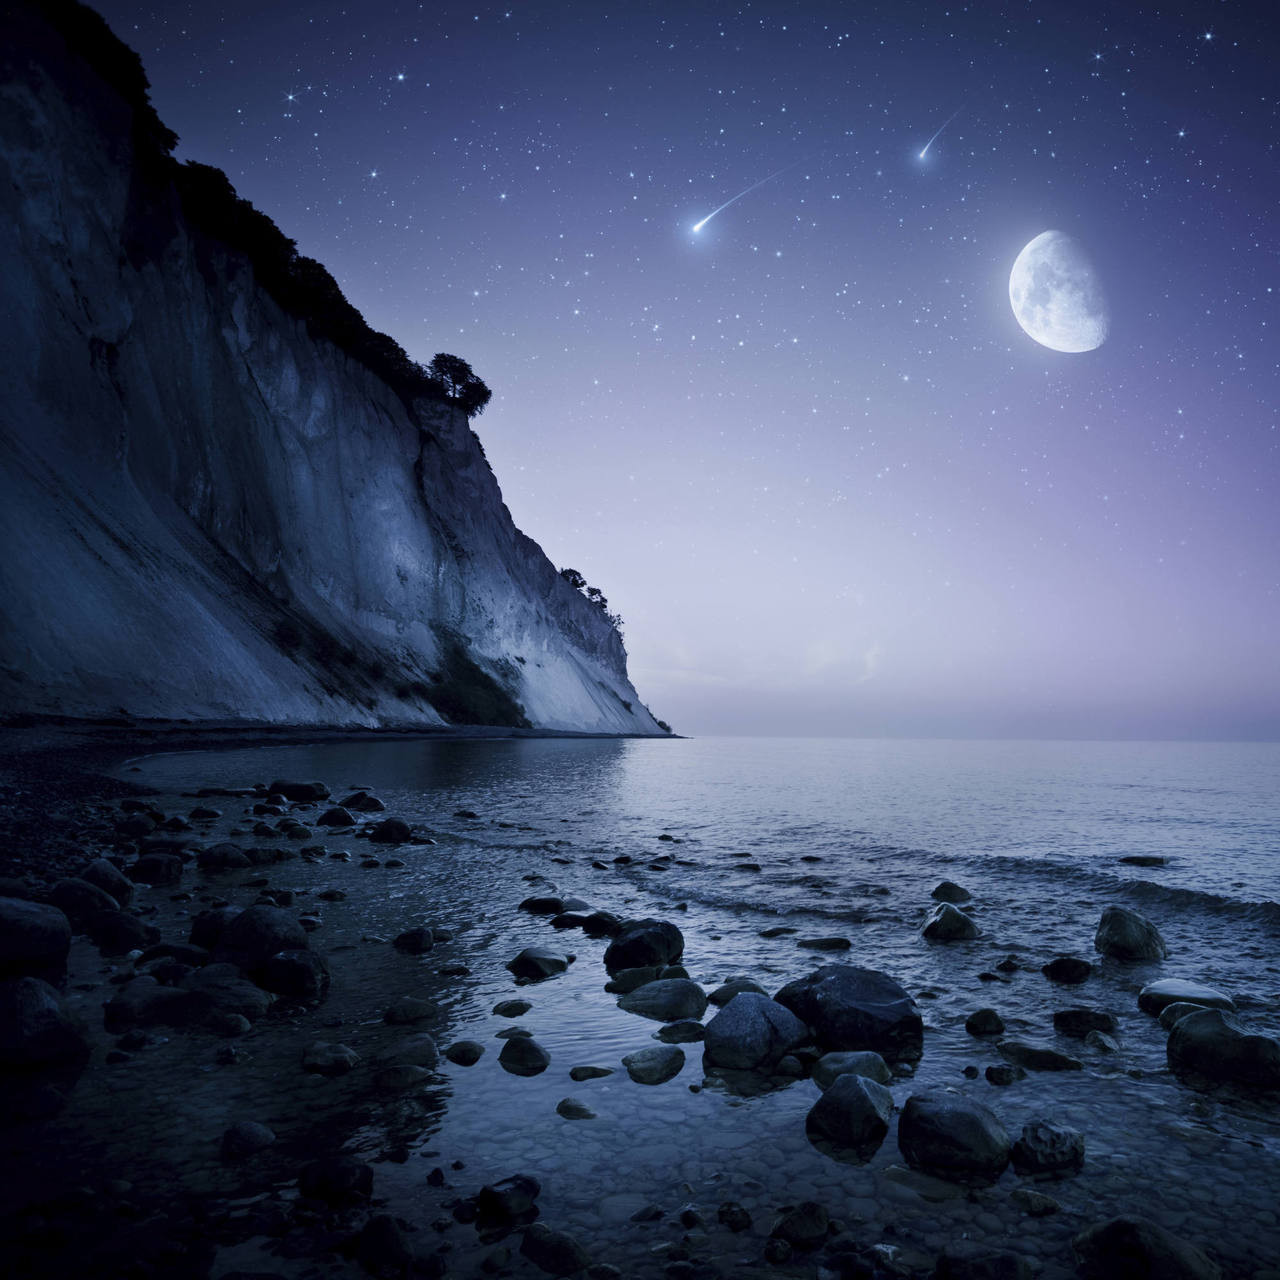 Rising Moon Over Ocean Mountains Against Starry Sky Walls 360